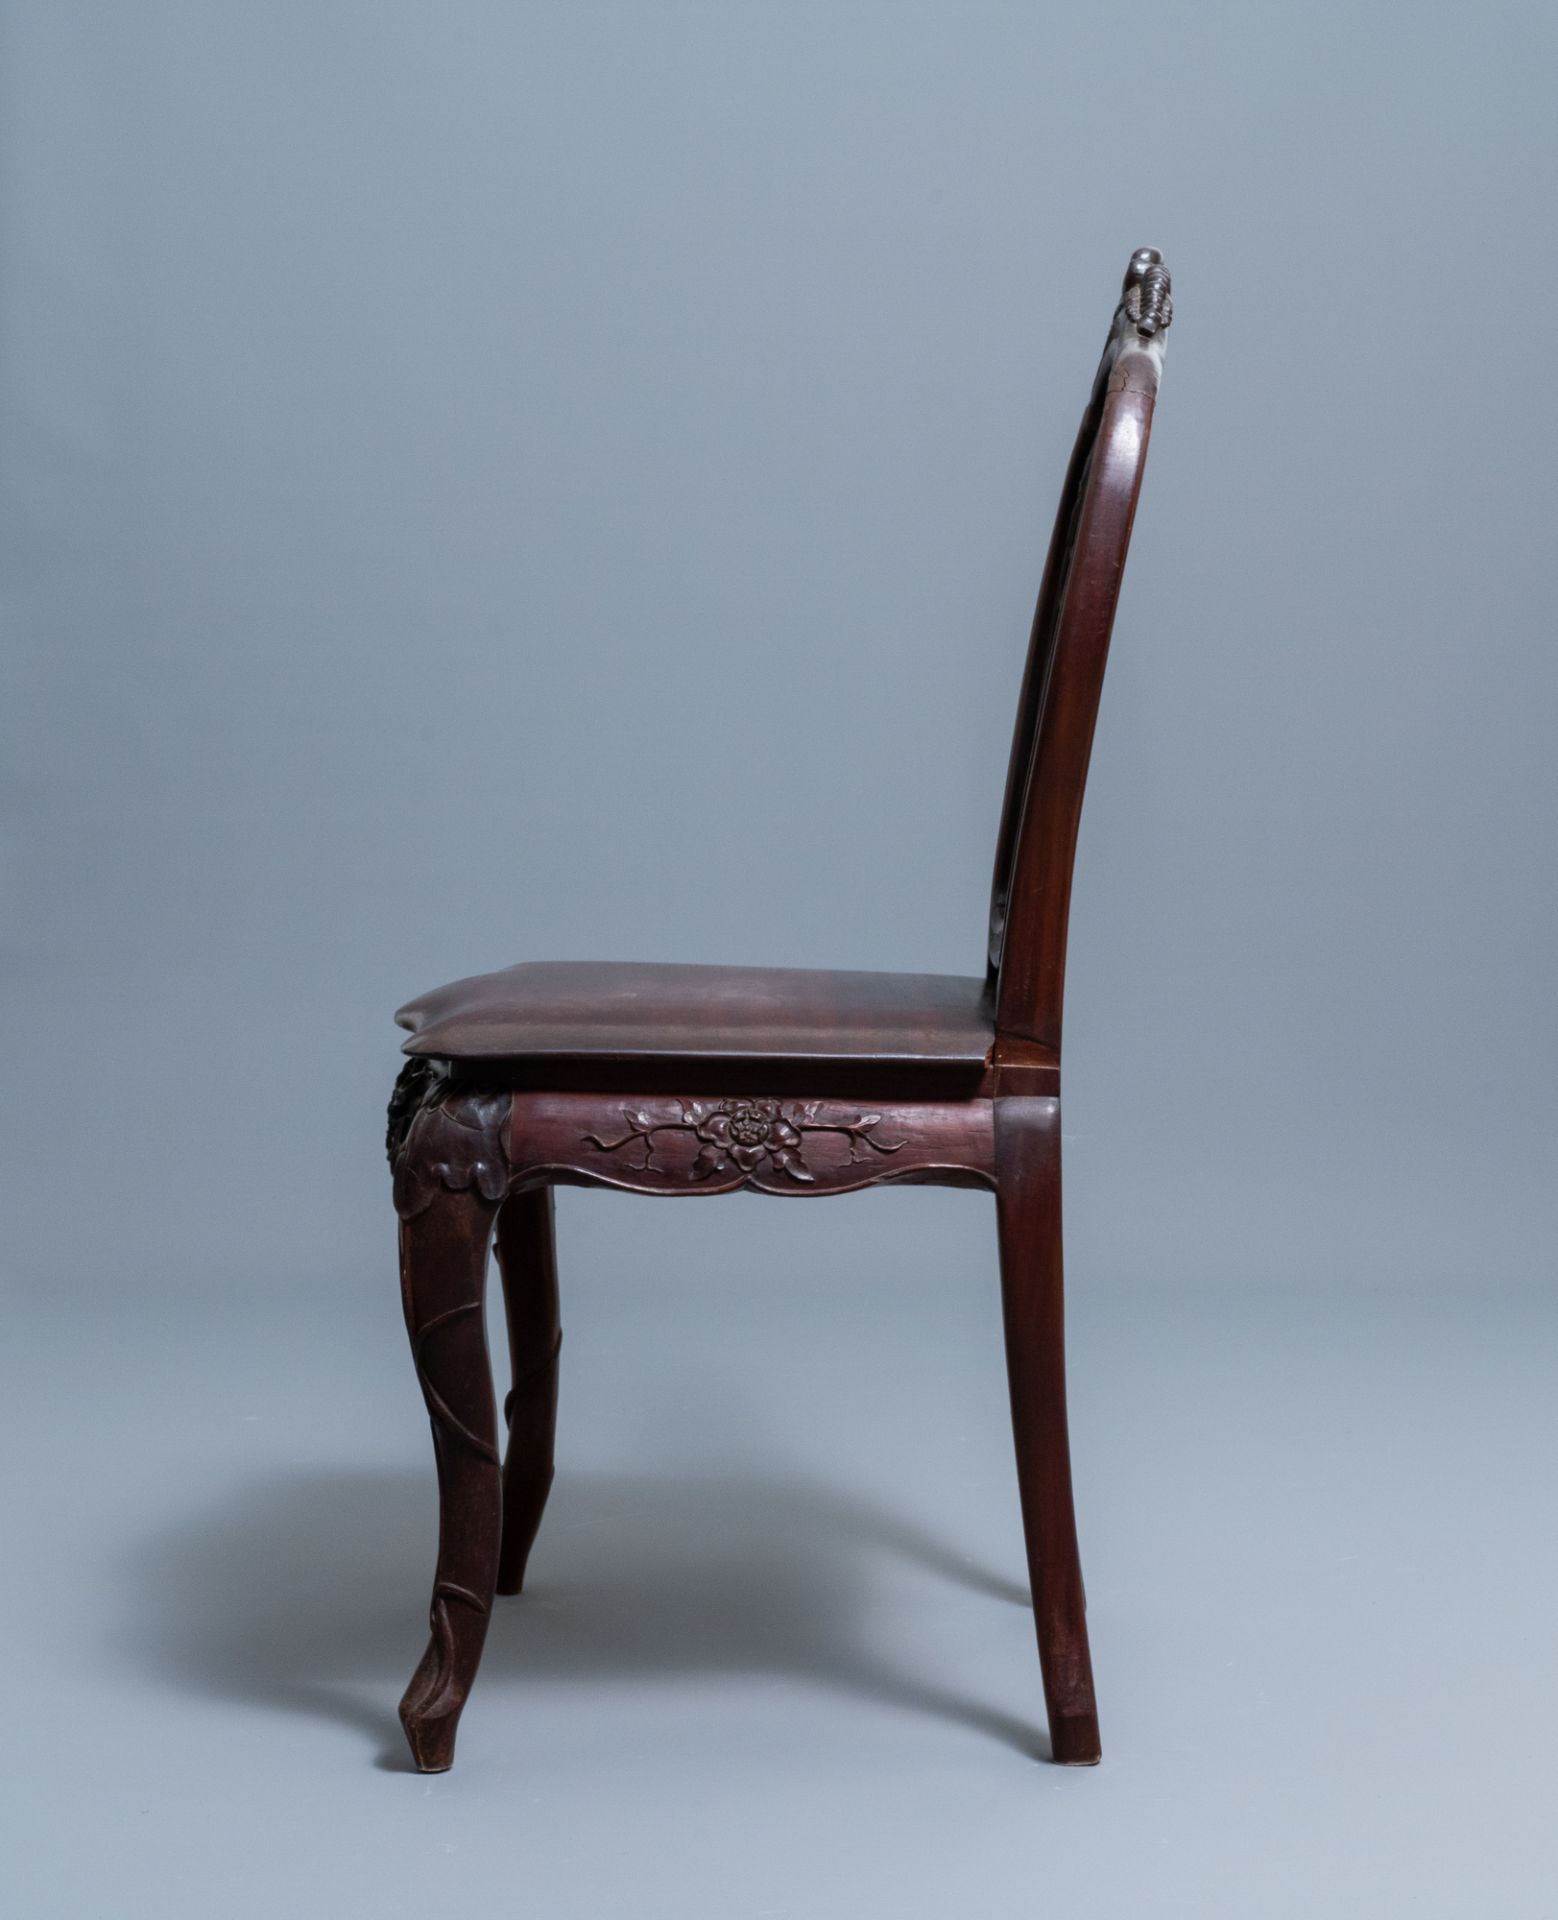 Four wooden chairs with reticulated backs, Macao or Portuguese colonial, 19th C. - Image 15 of 47